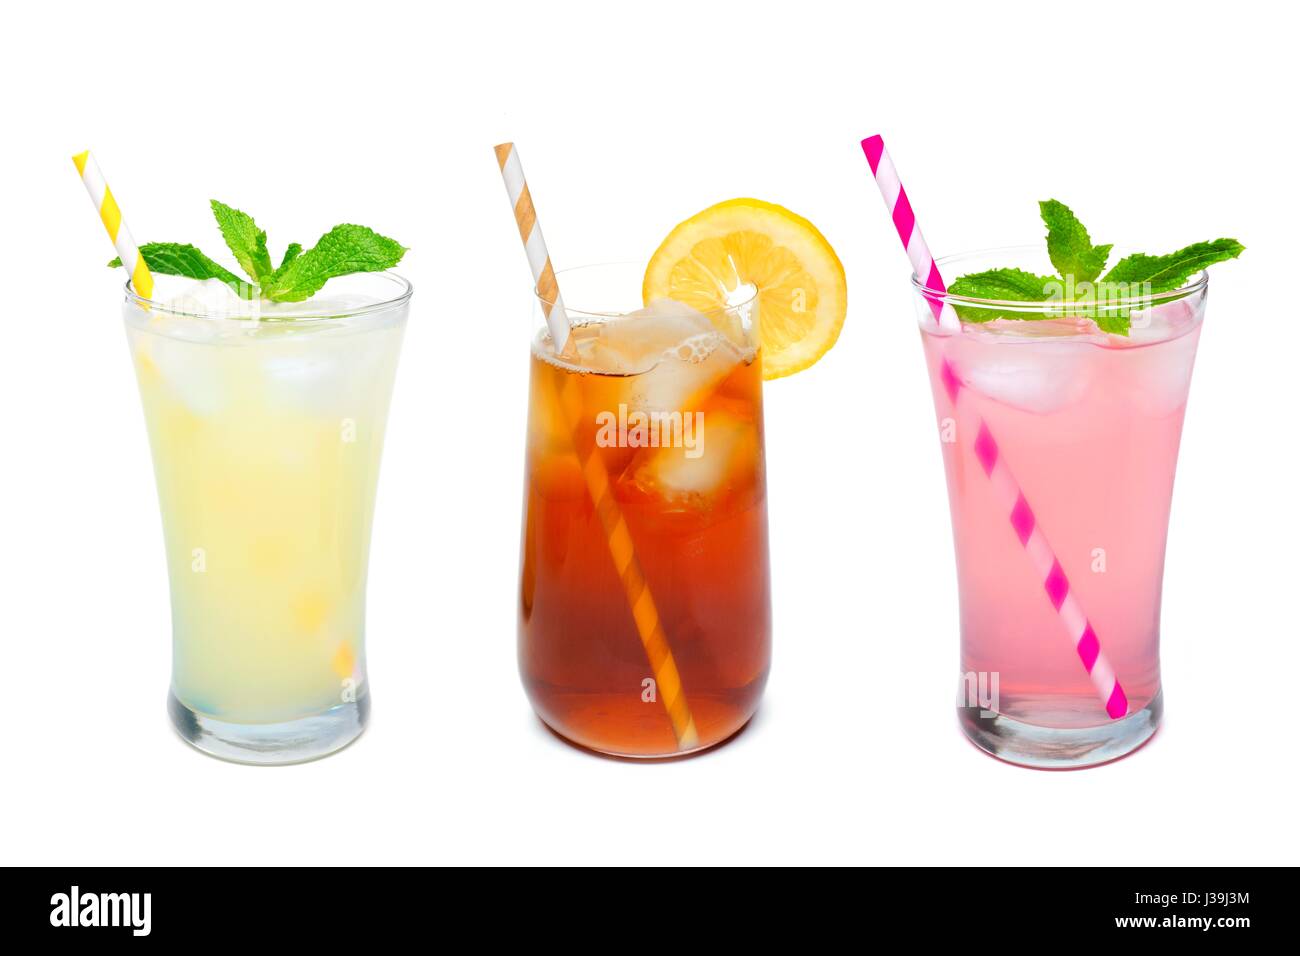 Three glasses of summer lemonade, iced tea, and pink lemonade drinks with straws isolated on a white background Stock Photo